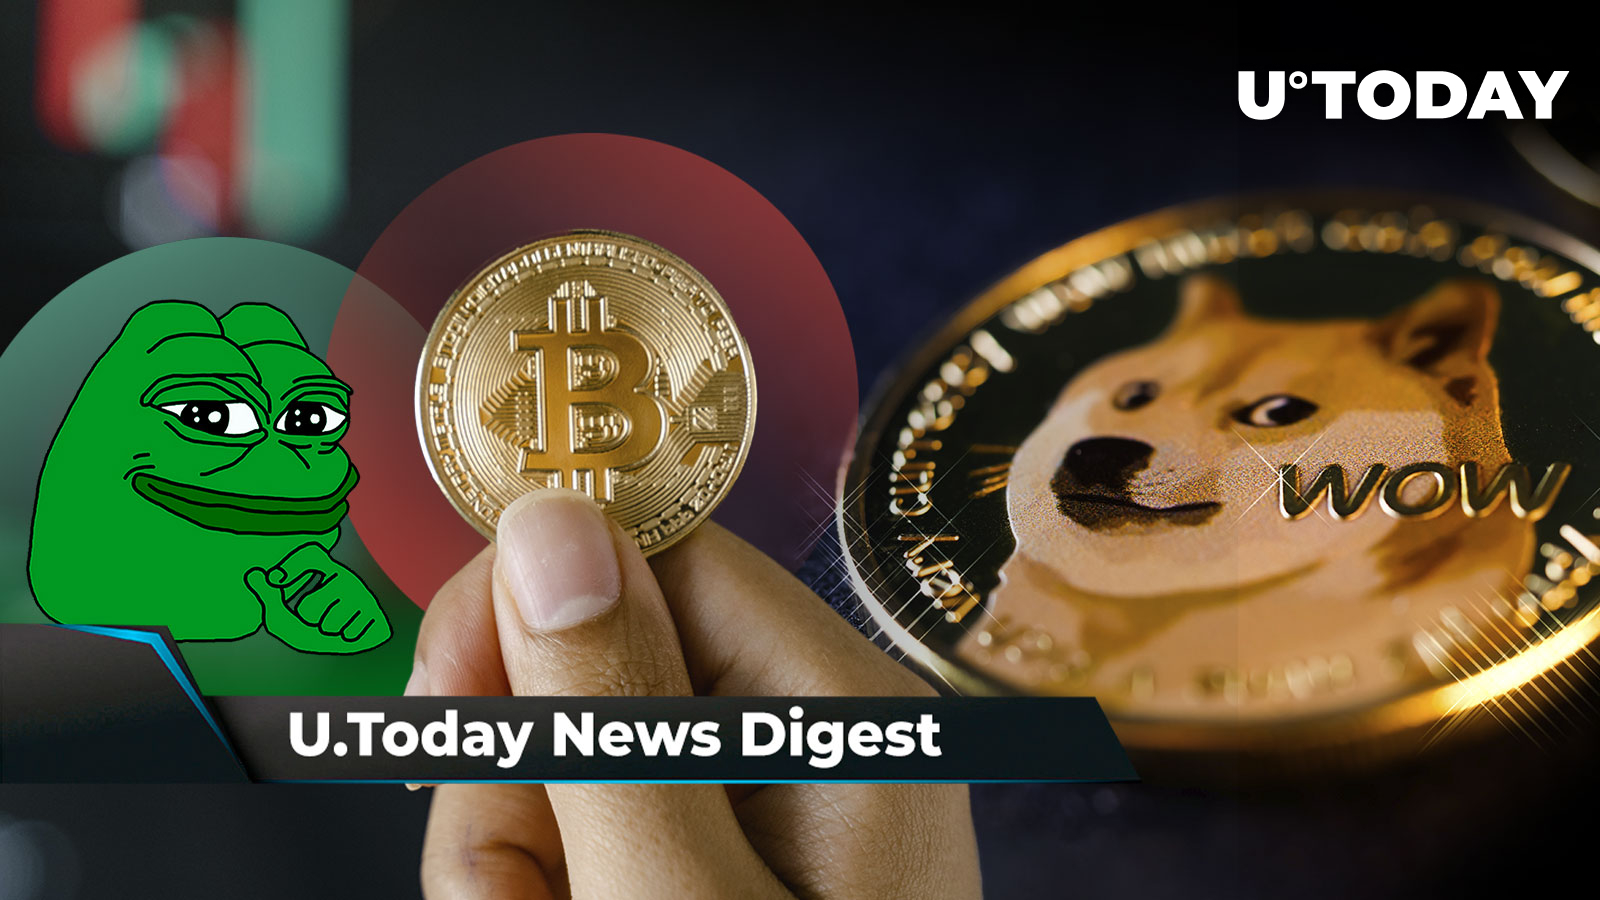 pepe-may-signal-trouble-for-btc-here-s-most-popular-answer-to-wen-shibarium-doge-sees-massive-spike-in-network-activity-crypto-news-digest-by-u-today